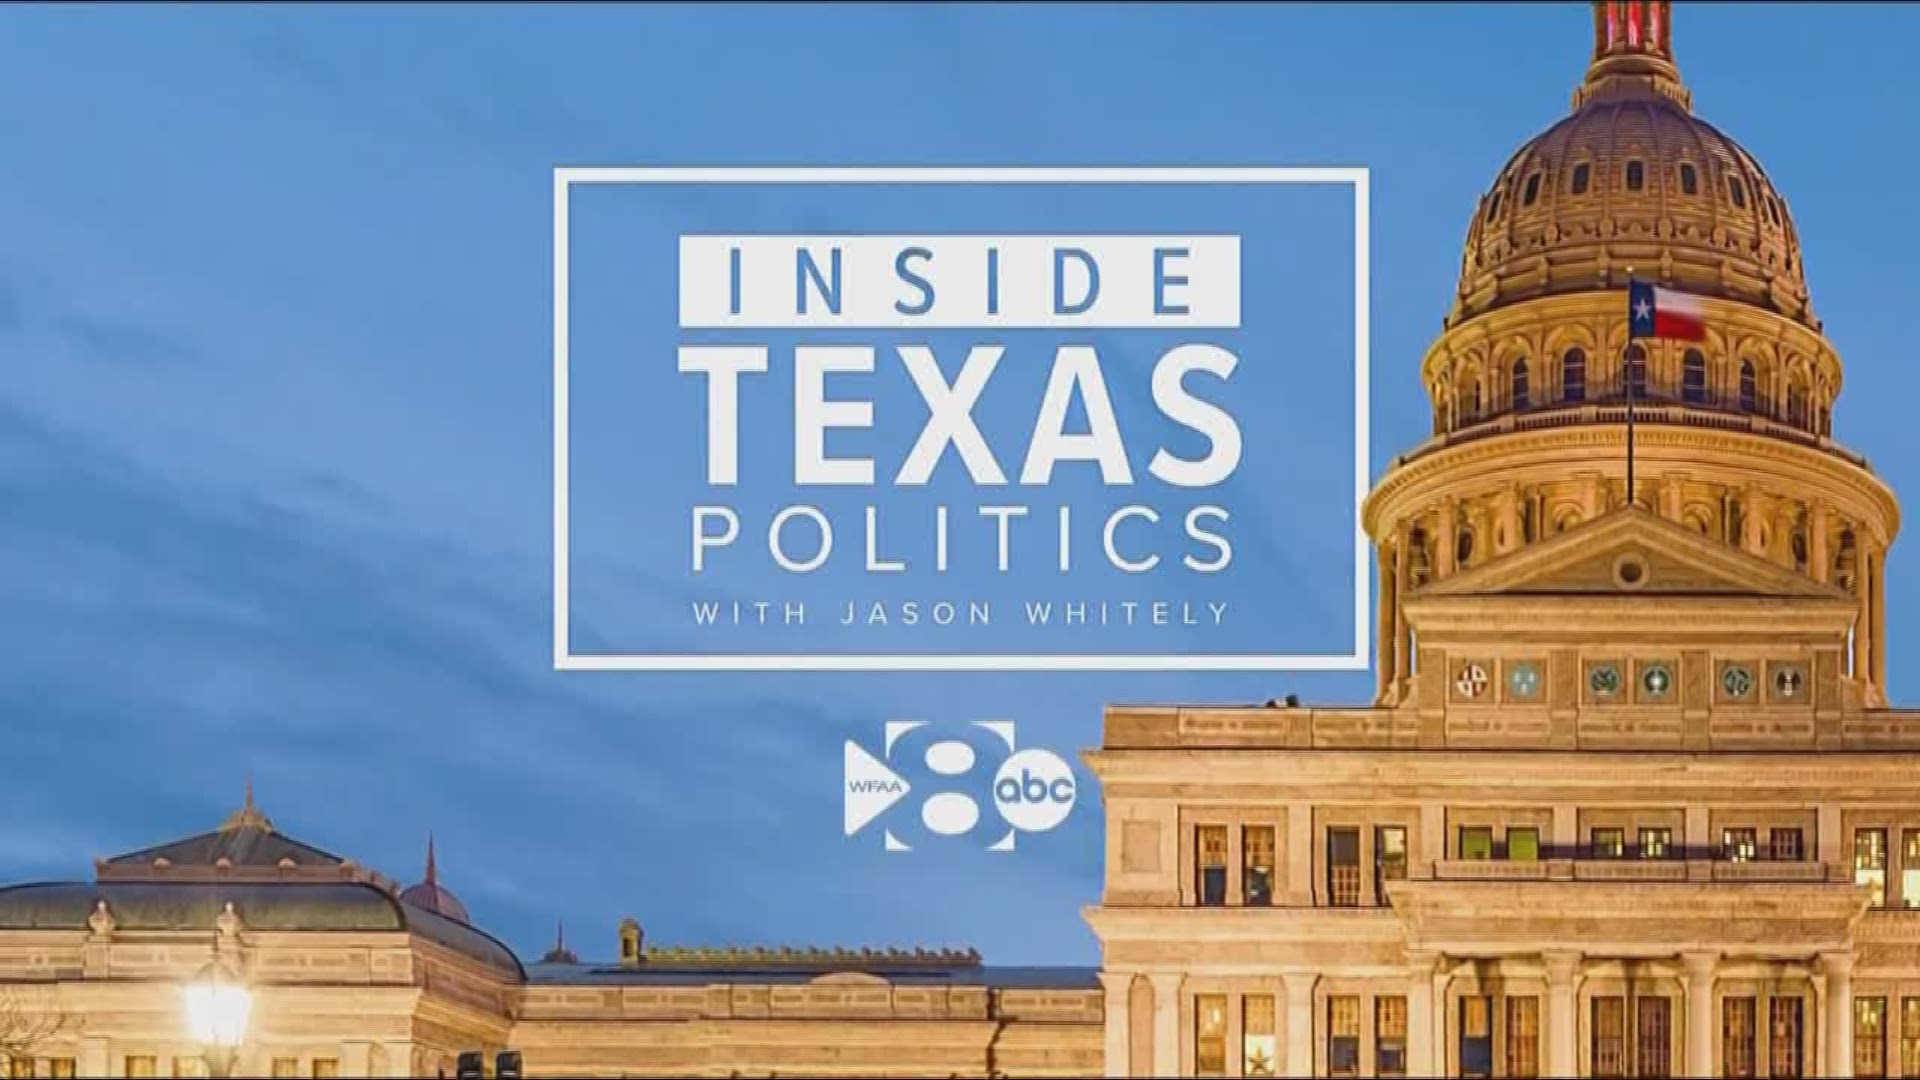 With a final full week before election day, Inside Texas Politics began with an interview with Congressman Beto O'Rourke, the Democratic candidate for U. S. Senate.